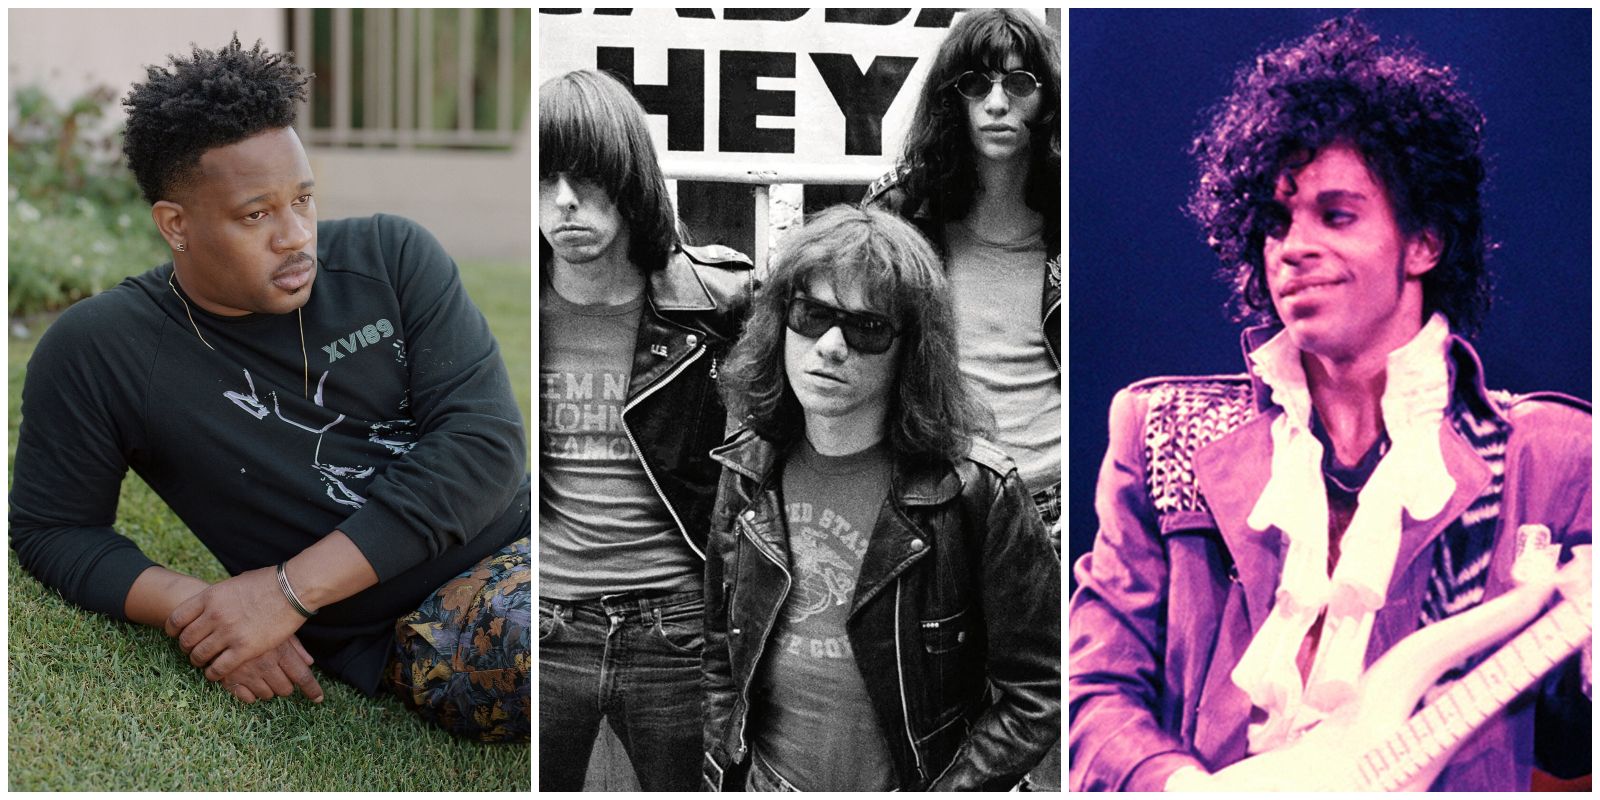 Popular musicians OME, Ramones, and Prince sing about comic books